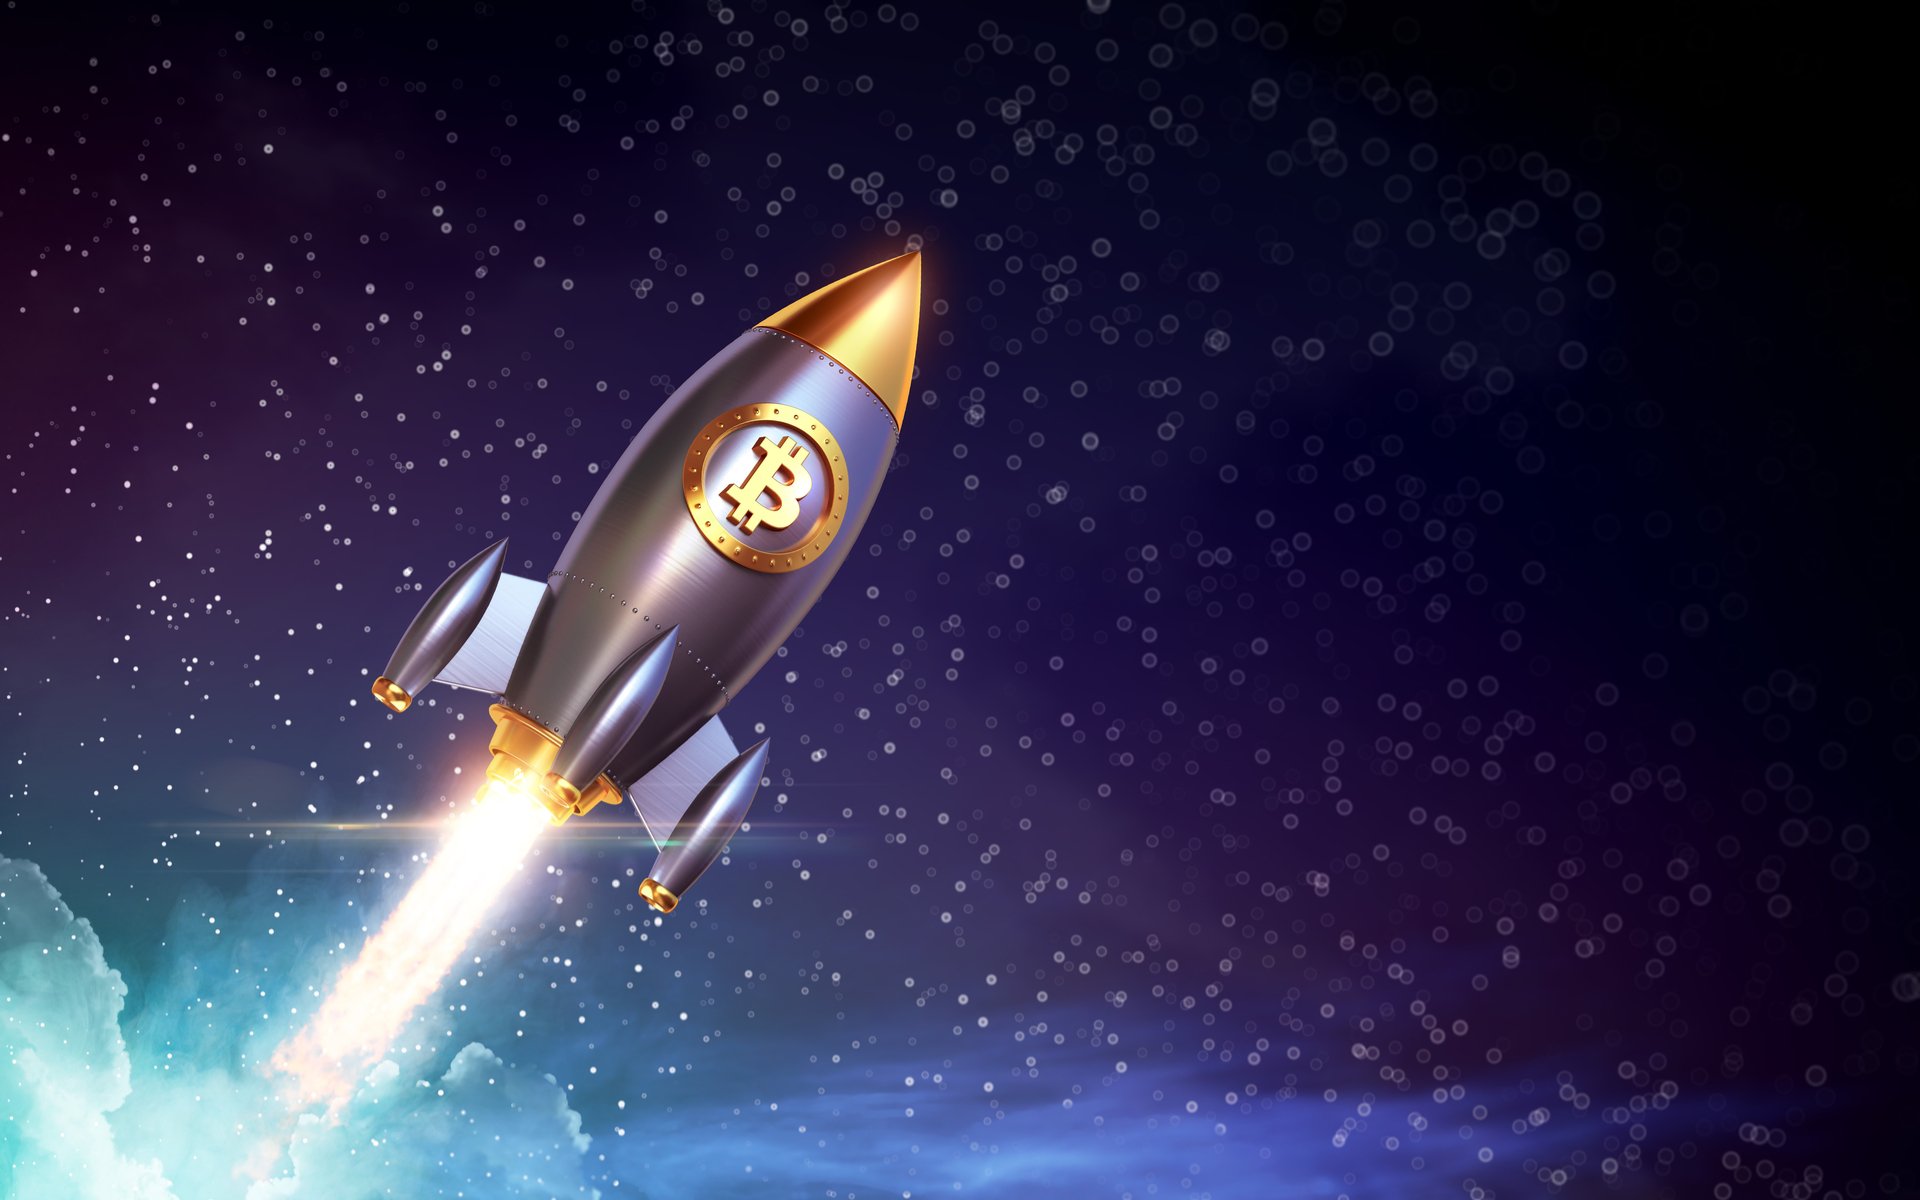 A New Day, a New Record – Bitcoin Blazes past the $16,000 Mark